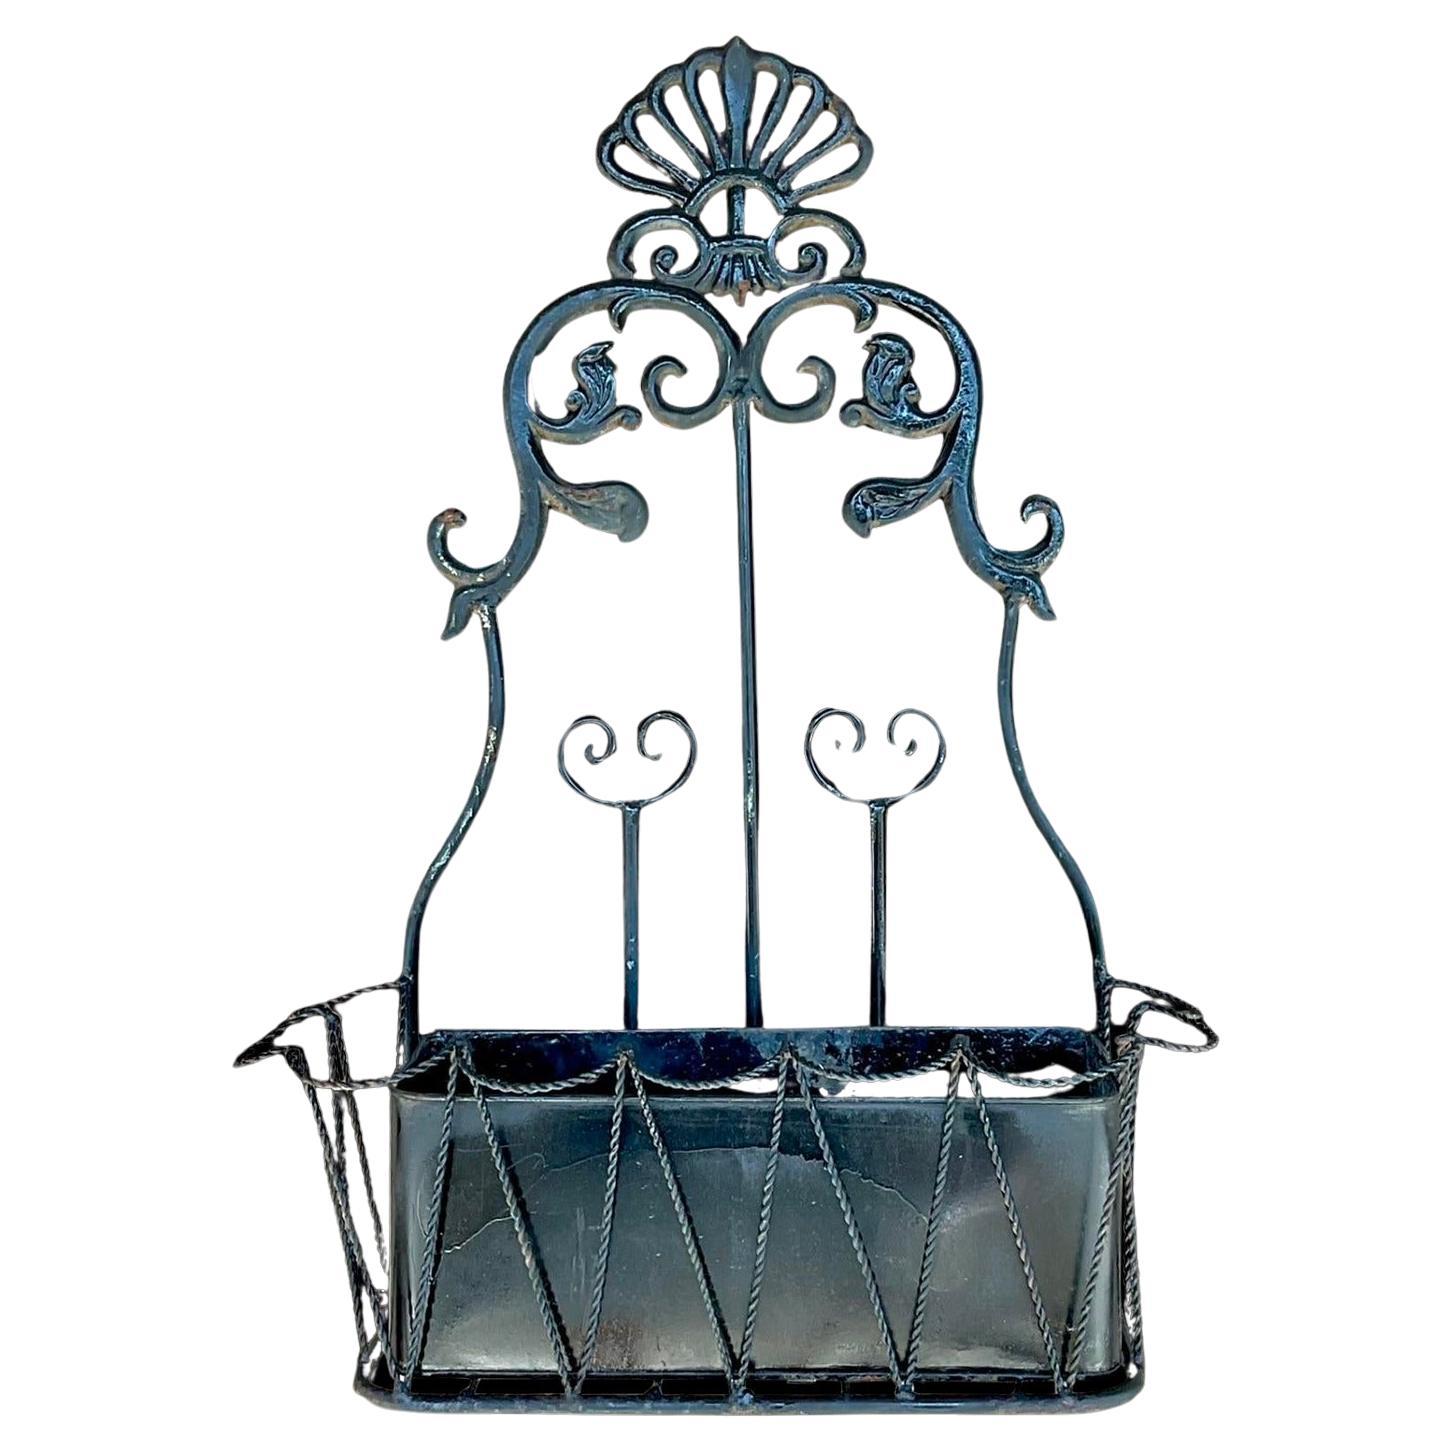 Vintage Boho Wrought Iron Hanging Wall Planter For Sale